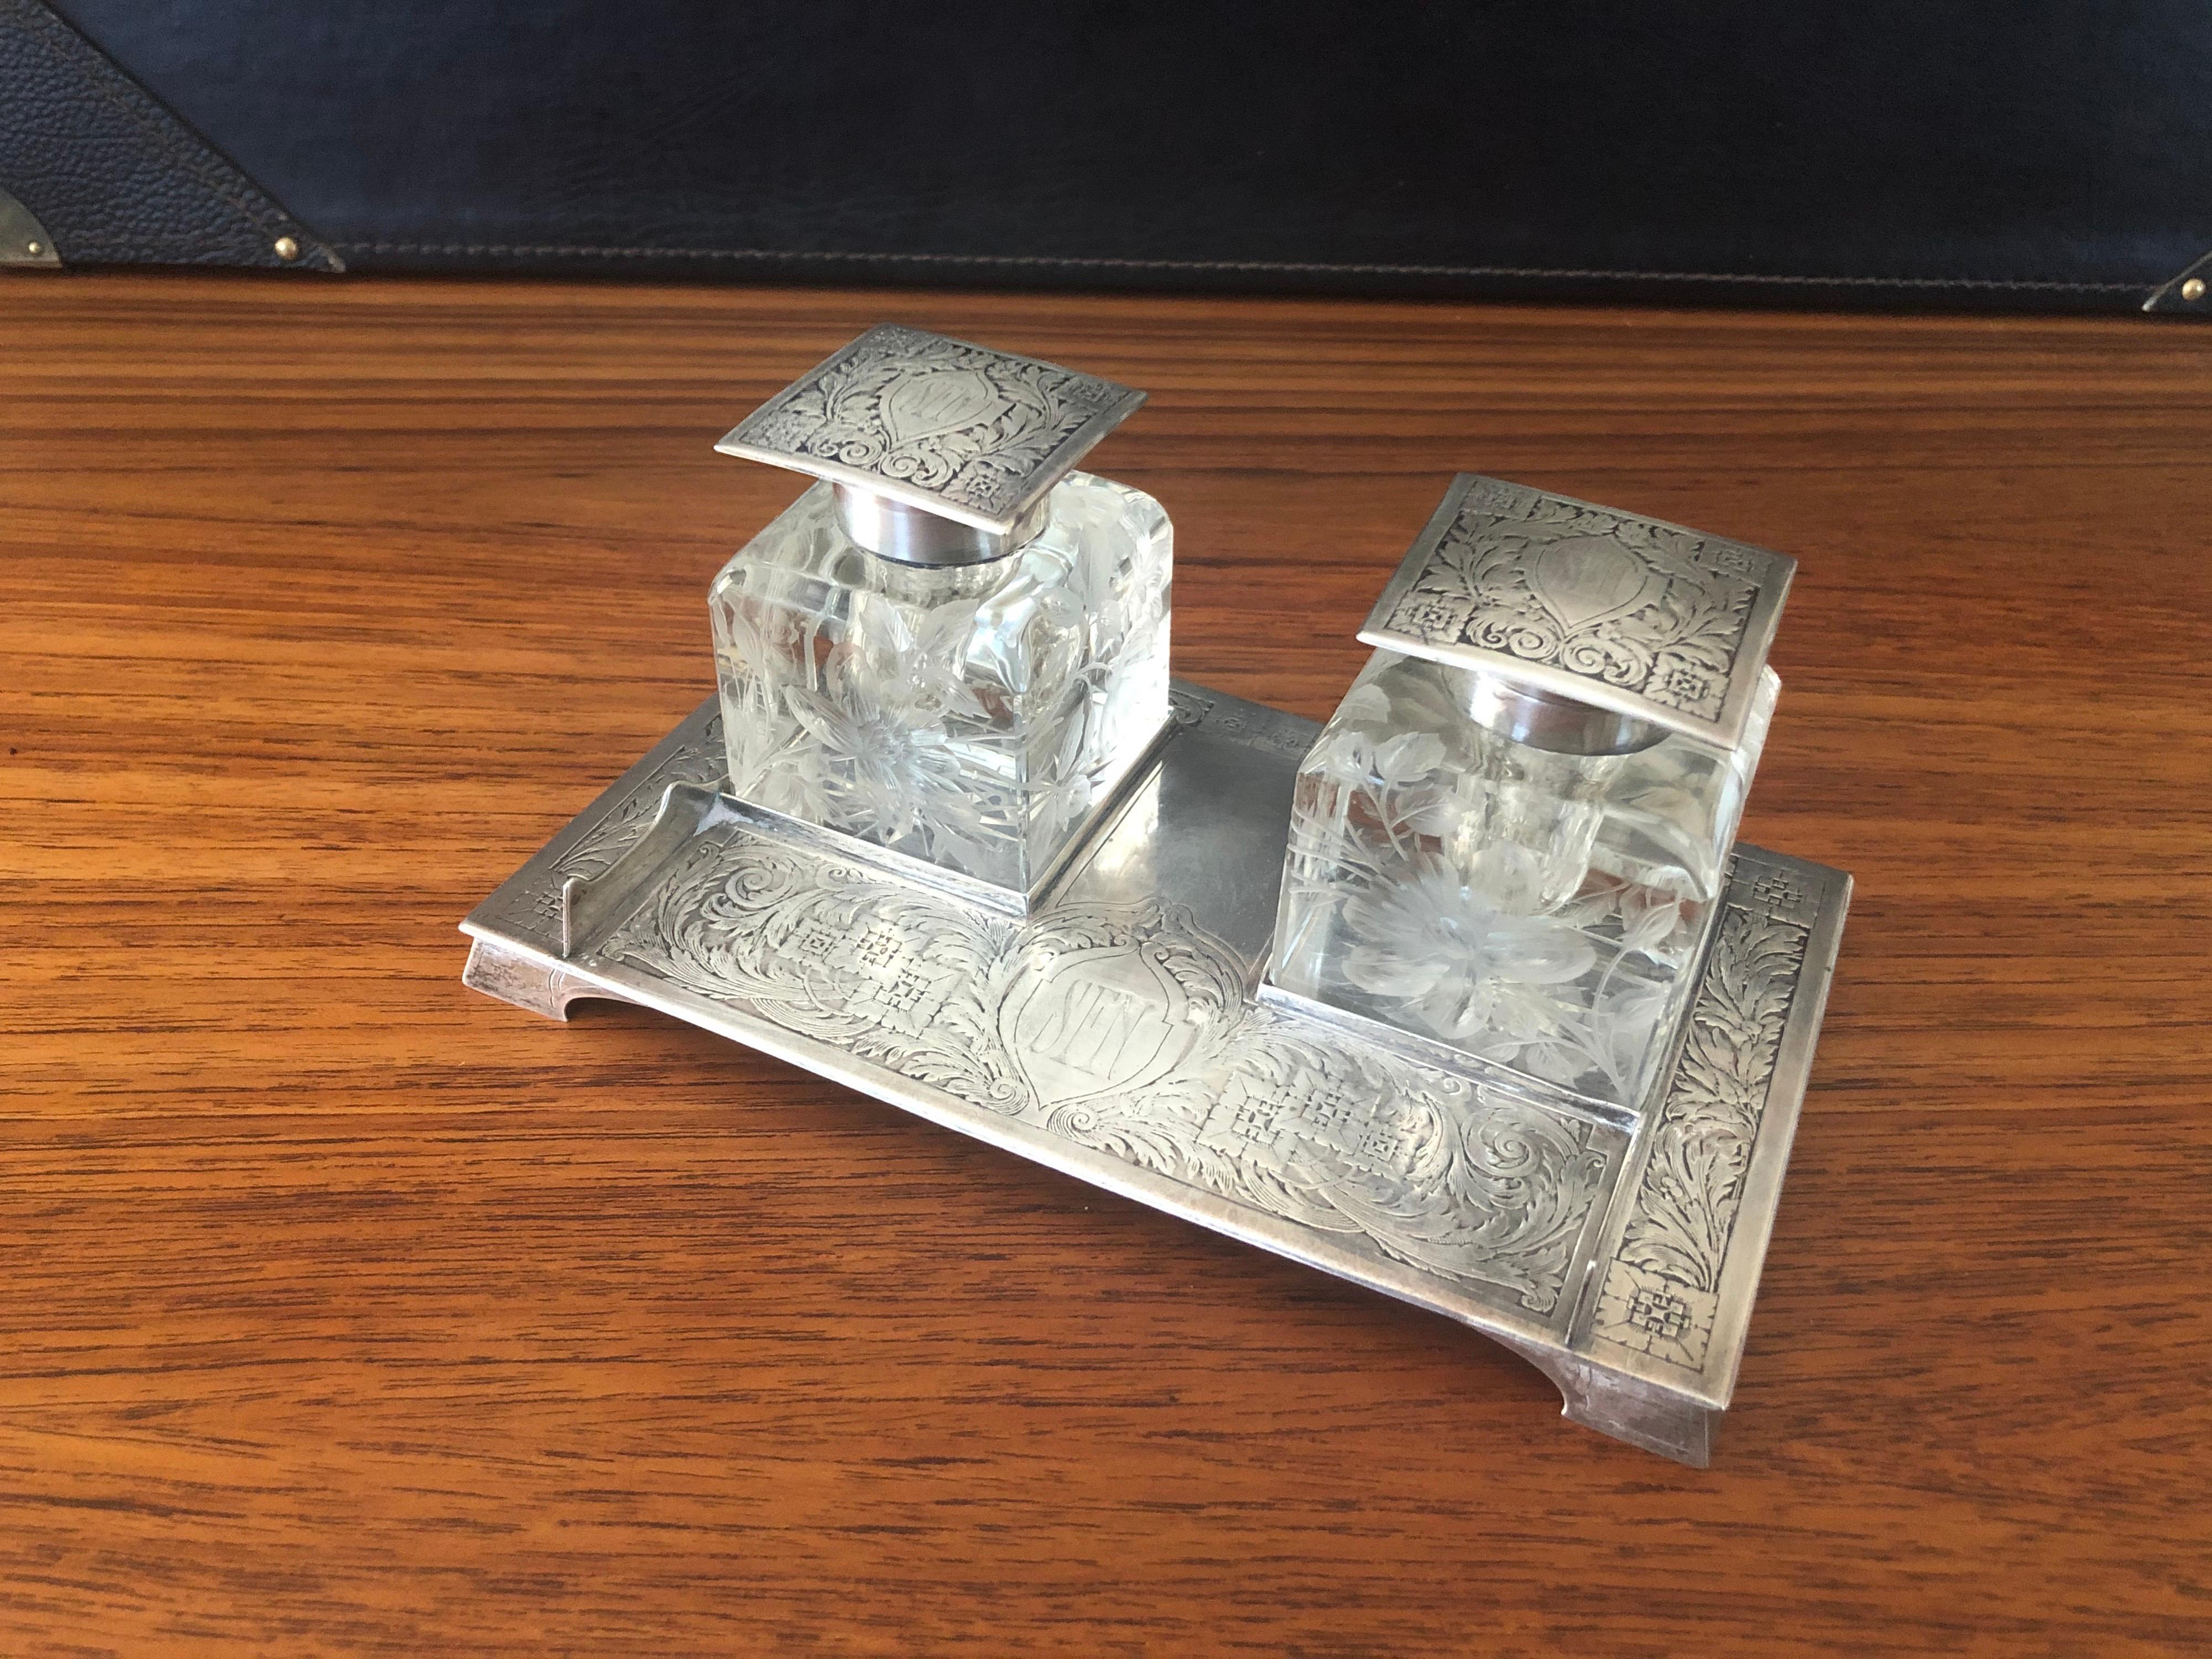 Antique Art Nouveau Double Inkwell on Sterling Silver Tray by J E Caldwell & Co. For Sale 1